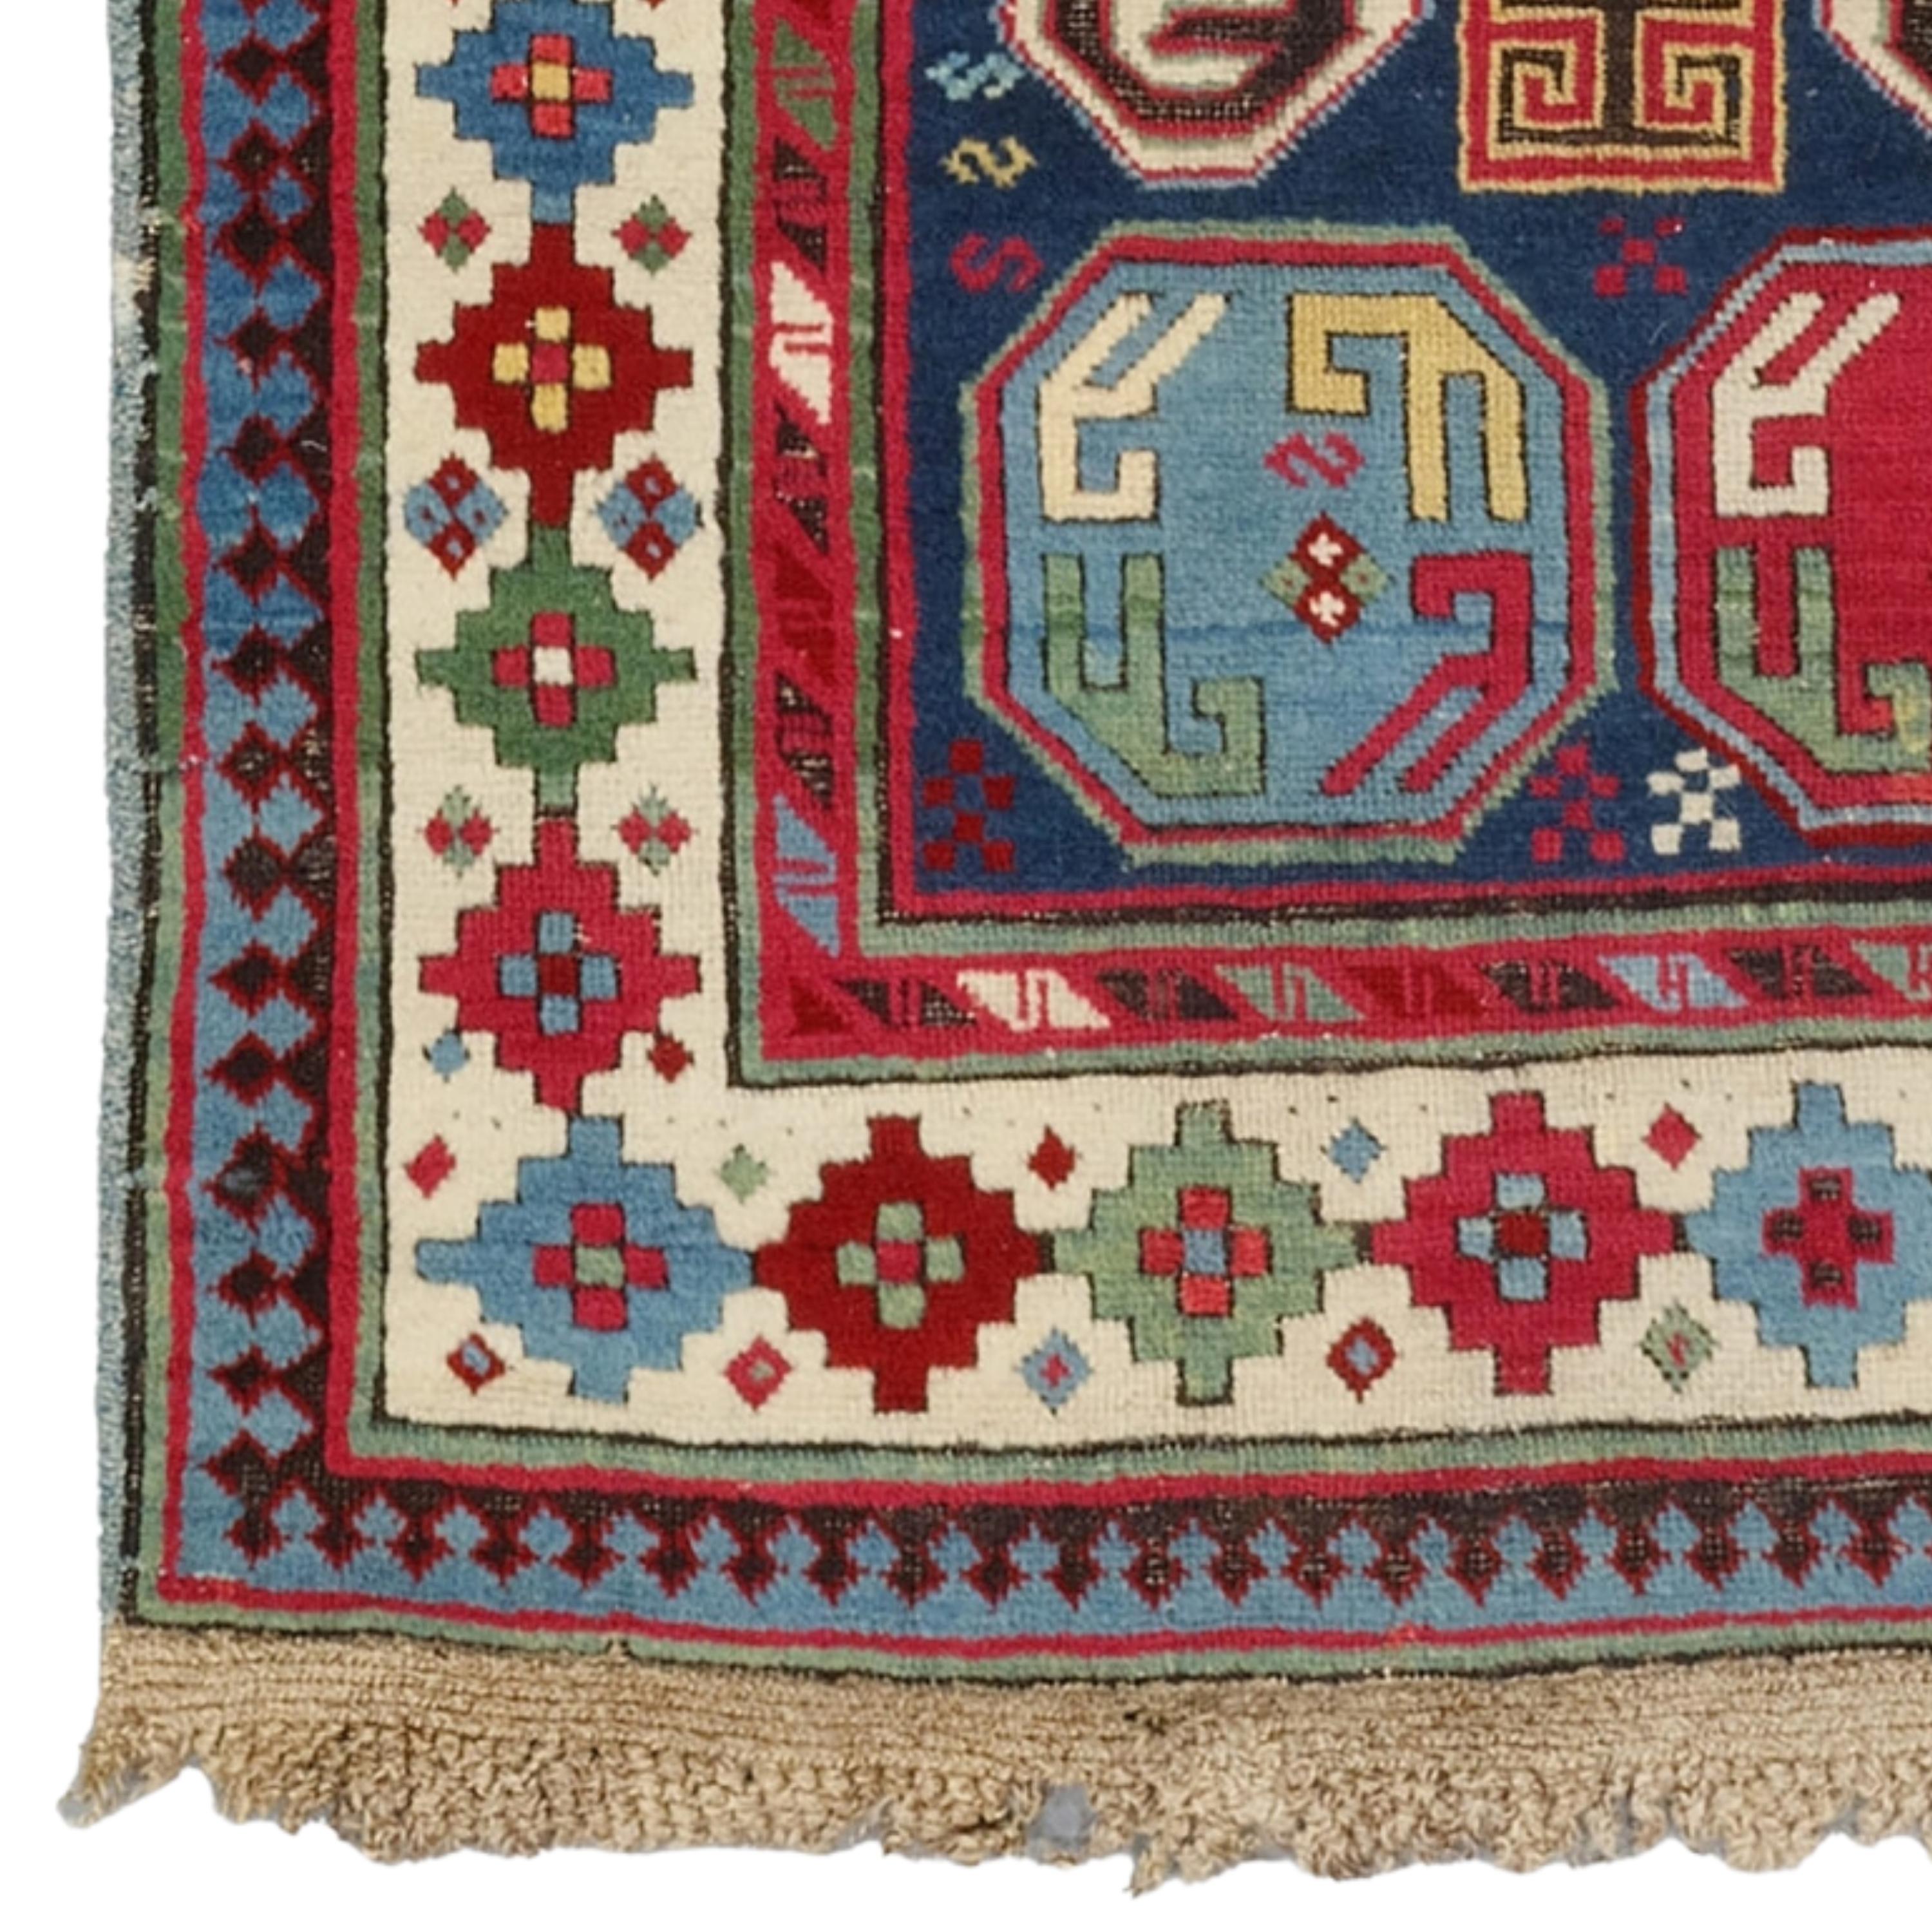 Caucasian Lenkoran Rug  Caucasus Rug
Size : 83 x 155 cm

This impressive 19th century Lenkoran Tapestry is a masterpiece reflecting the elegant and sophisticated craftsmanship of a historic period.

Rich Patterns: The carpet is decorated with